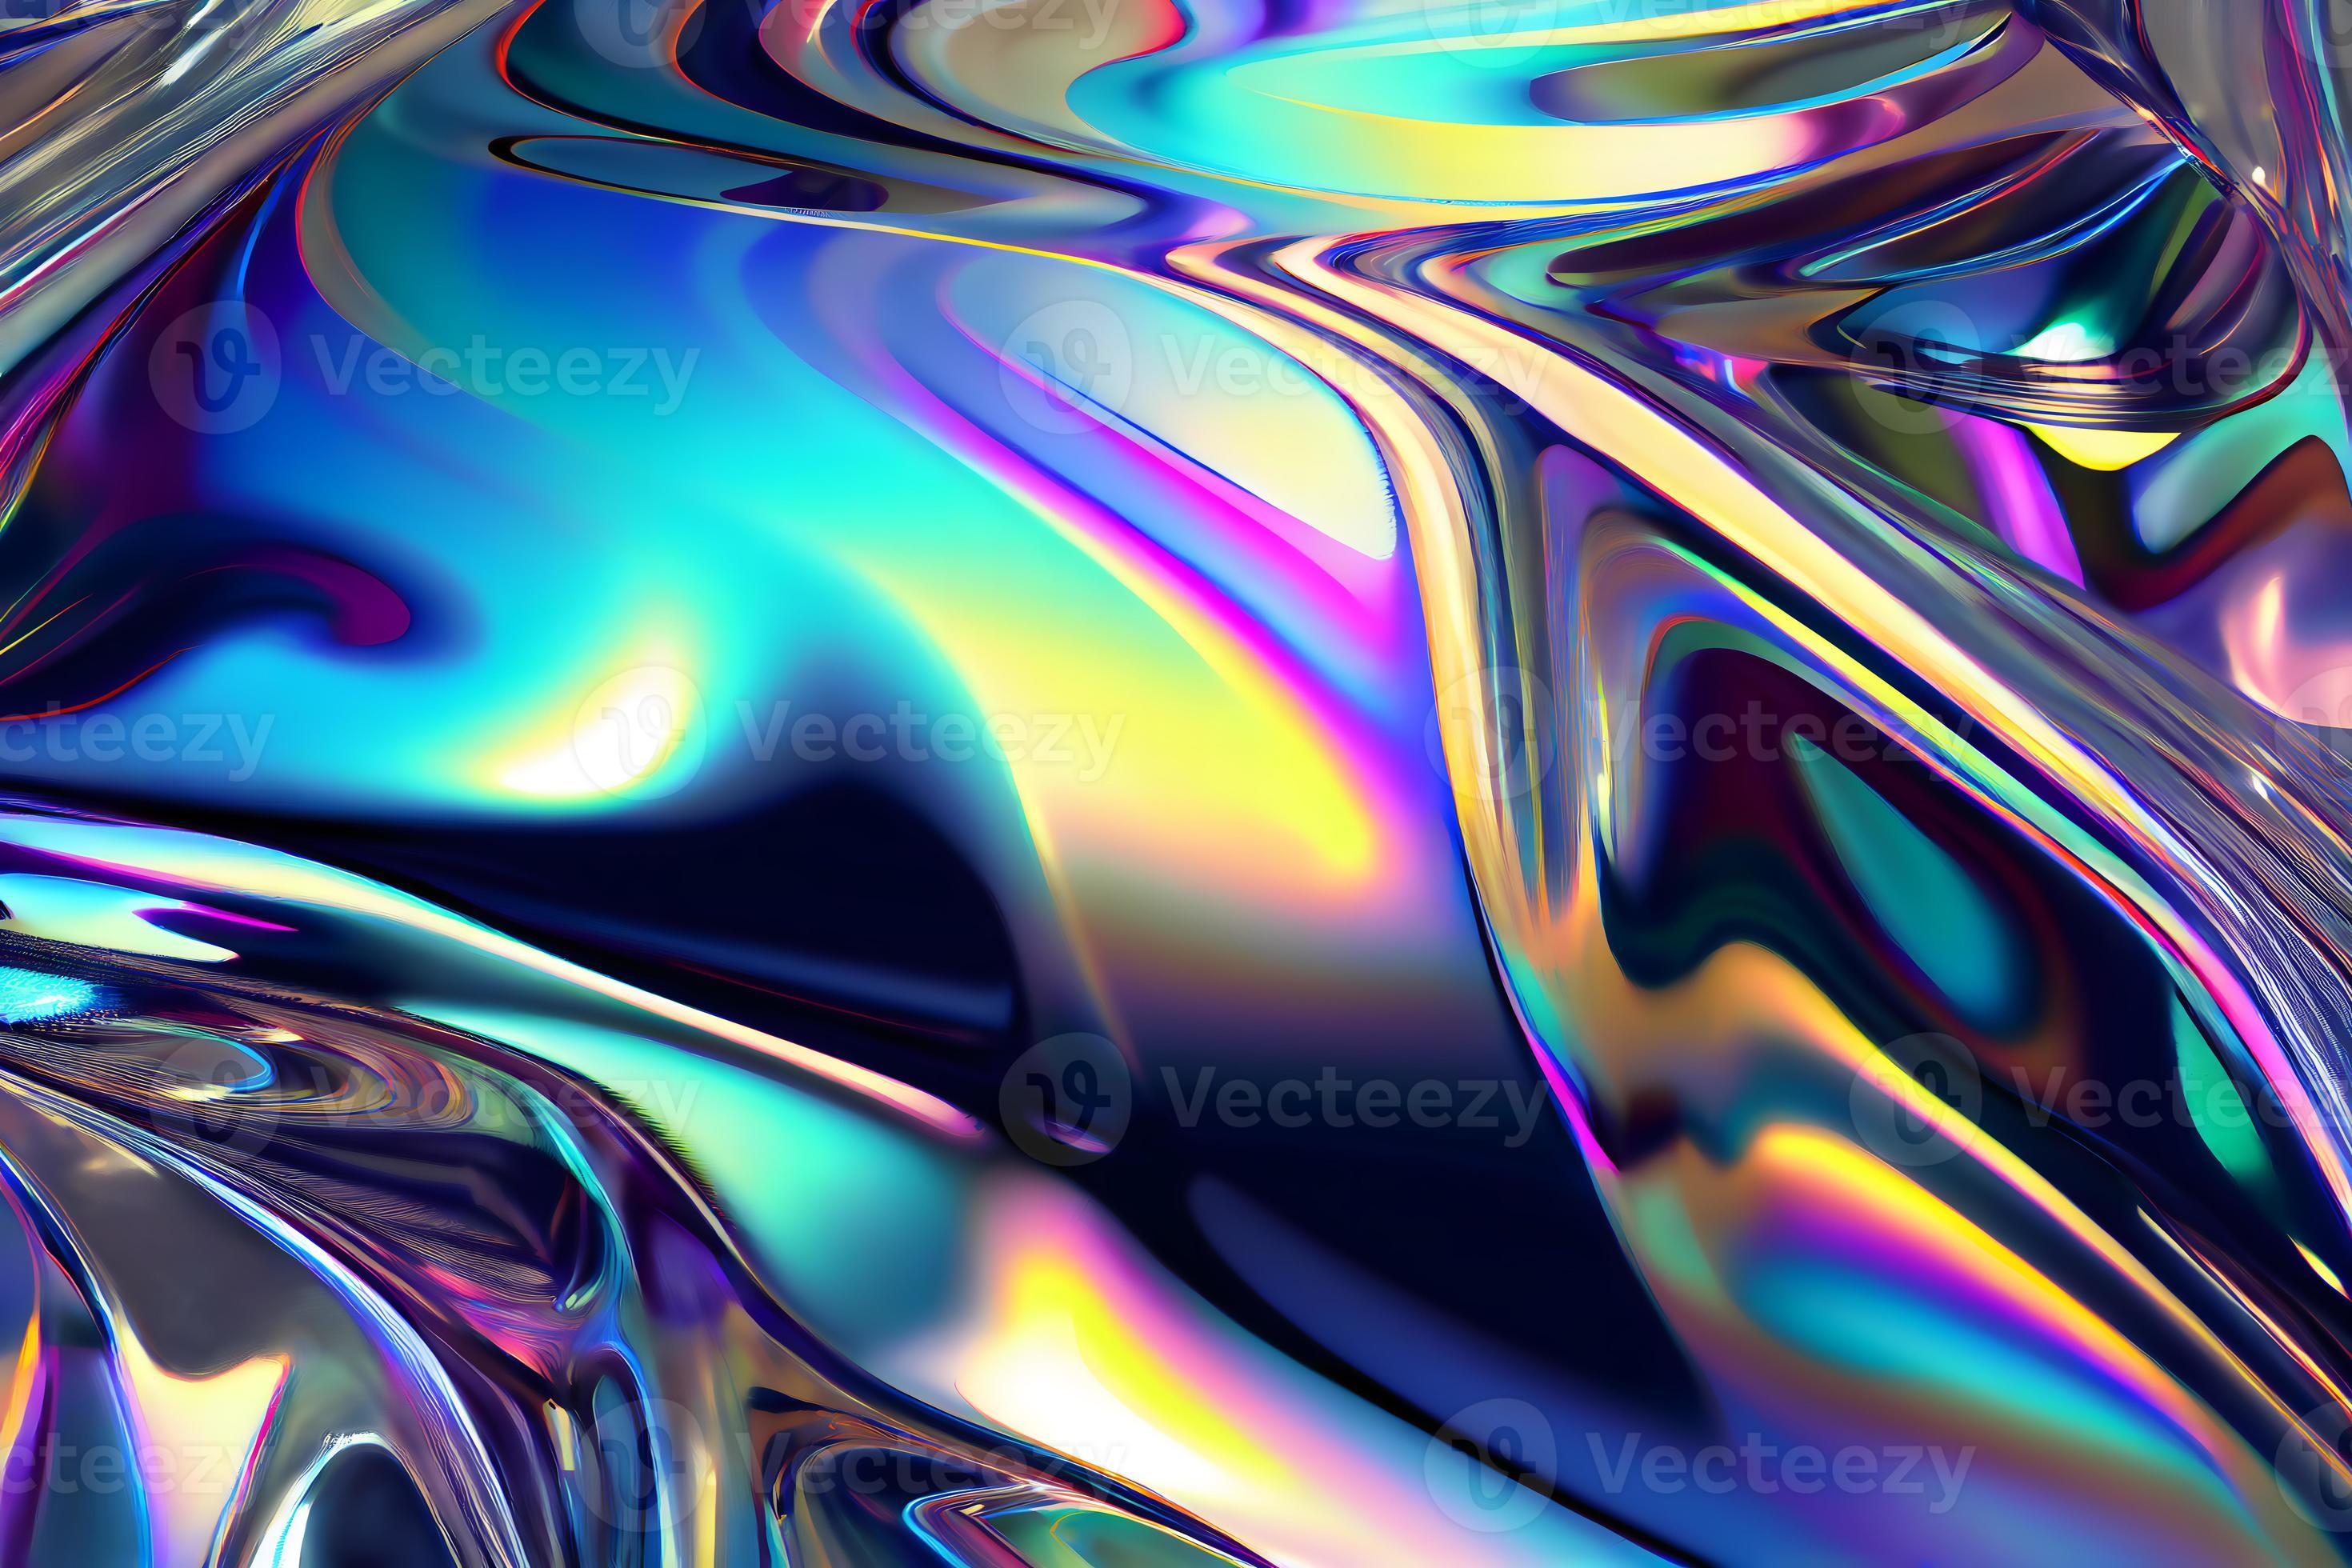 Liquid chrome metal surface with colorful chromatic reflection